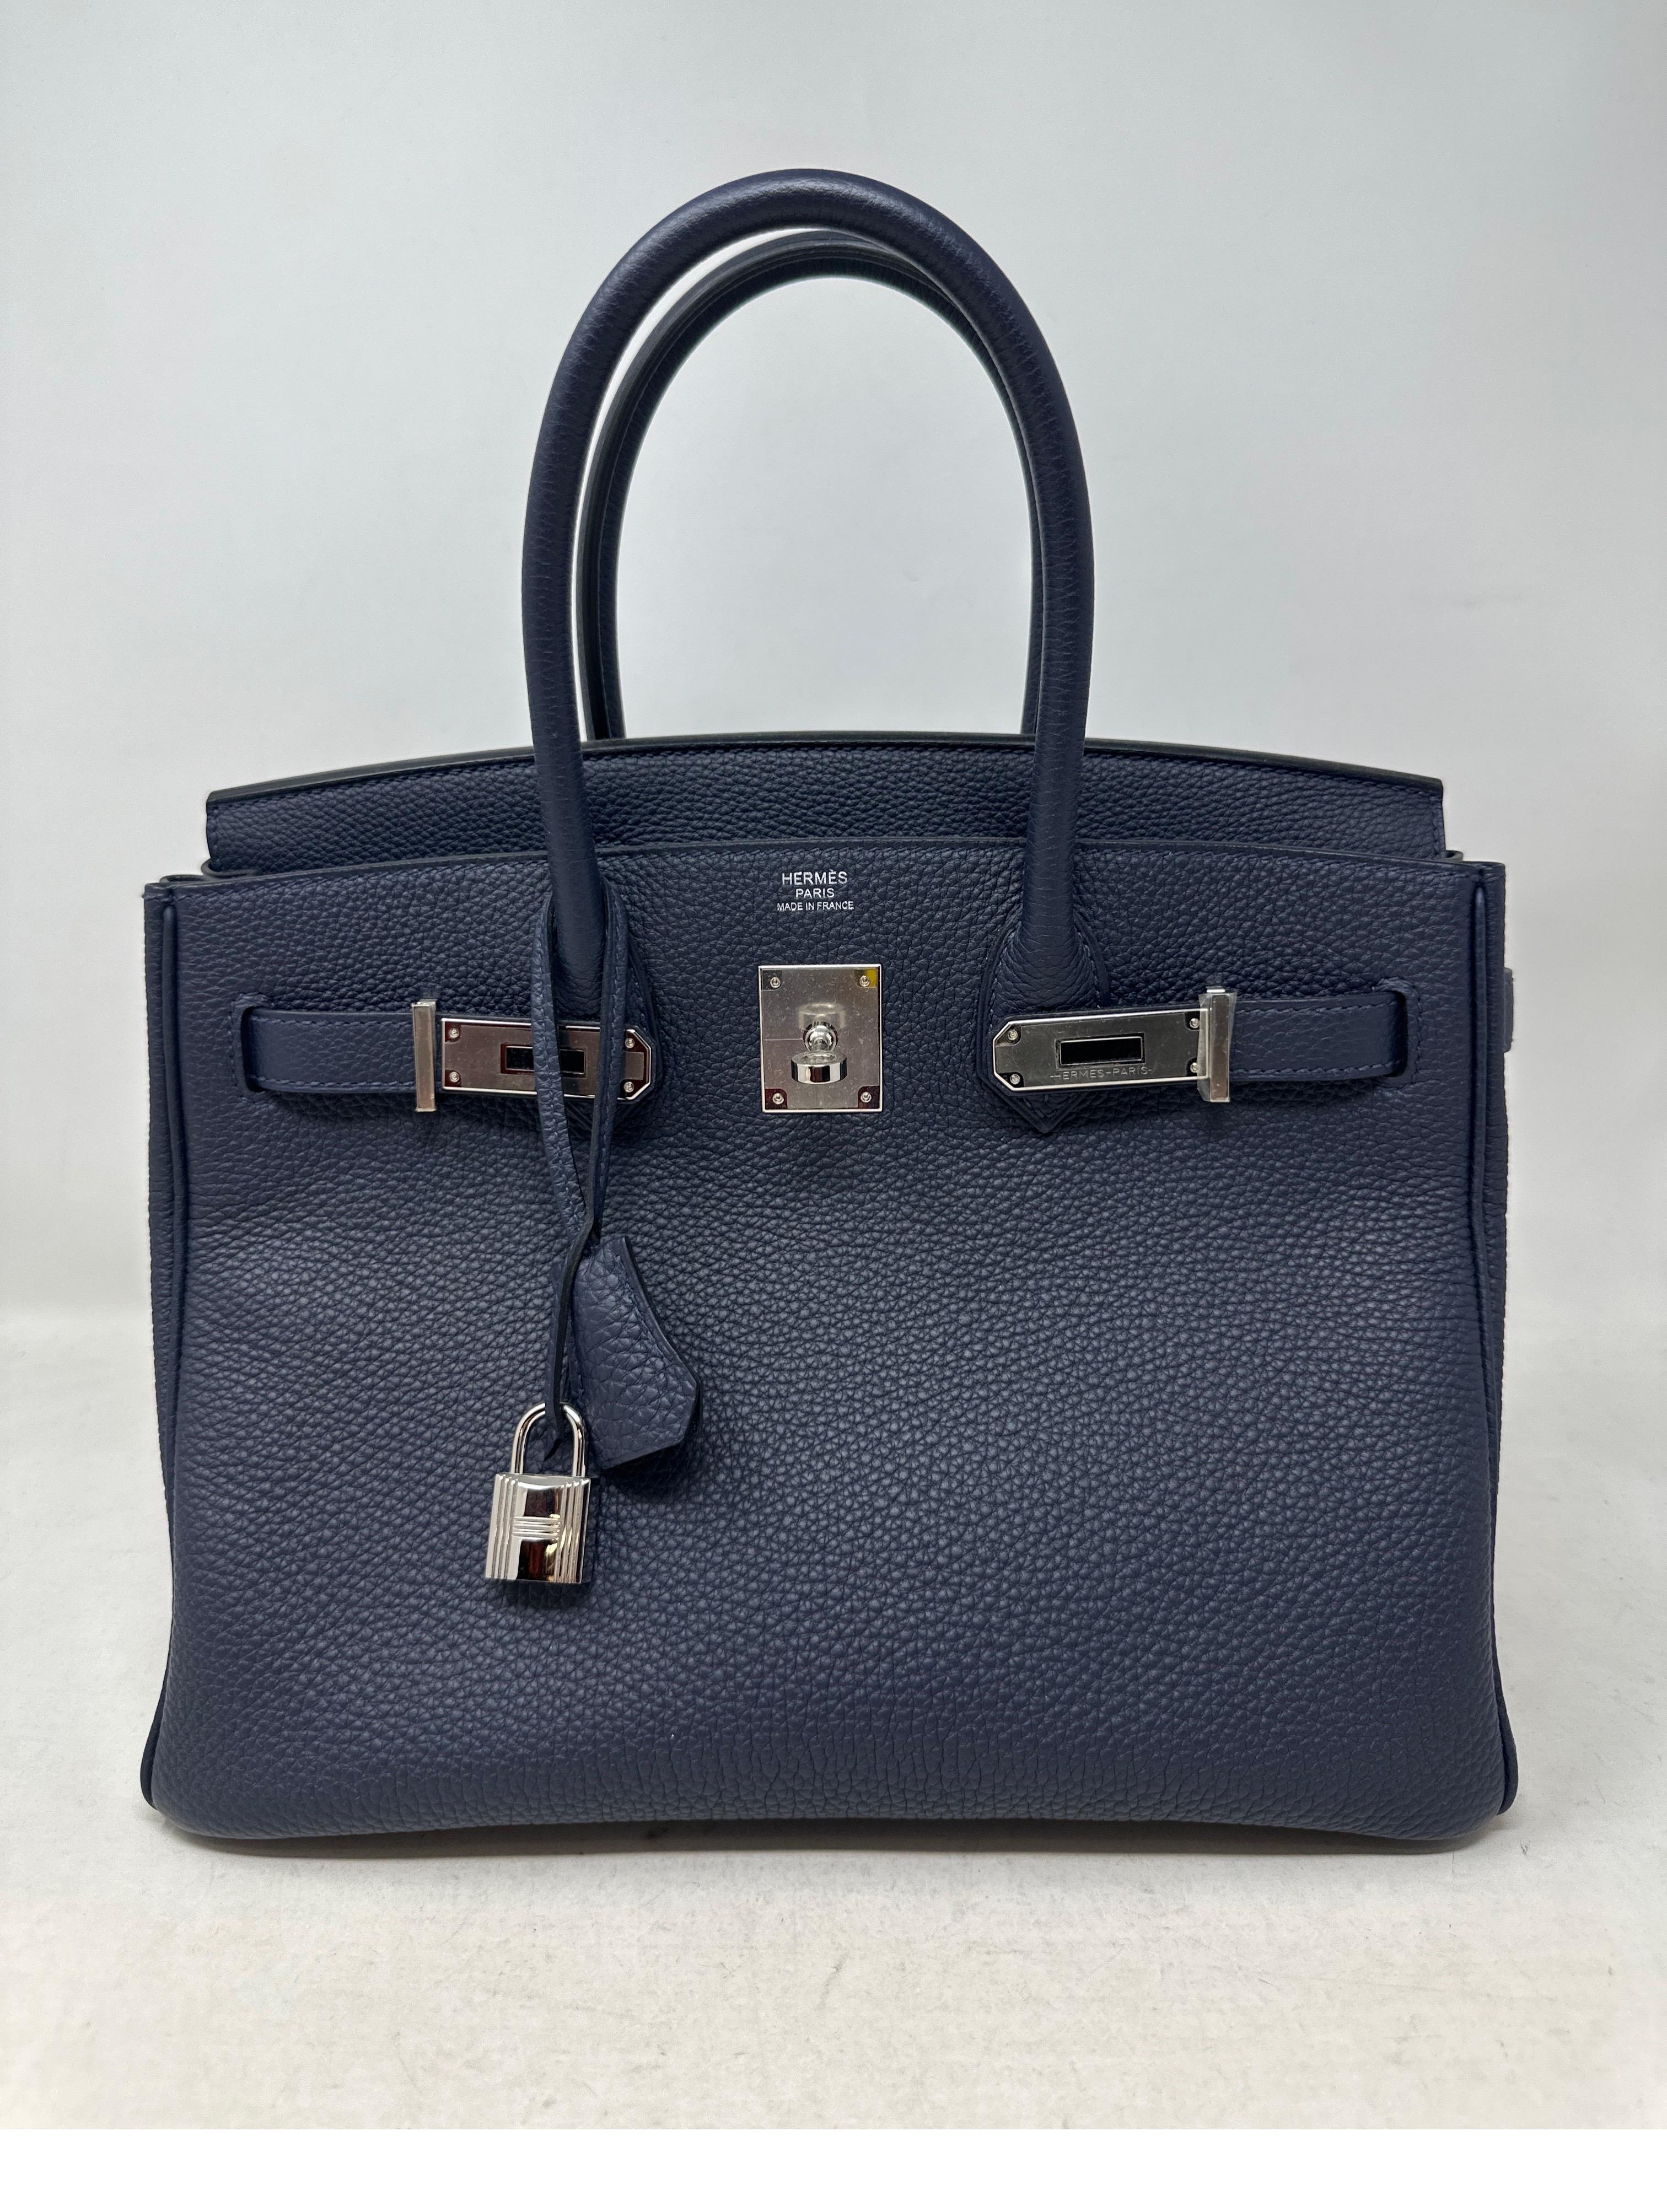 Hermes Navy Birkin 30 Bag. Palladium hardware. Newer bag in brand new condition. Togo leather. Rare navy color. Most wanted size. Includes clochette, lock, keys, and dust bag. Guaranteed authentic. 